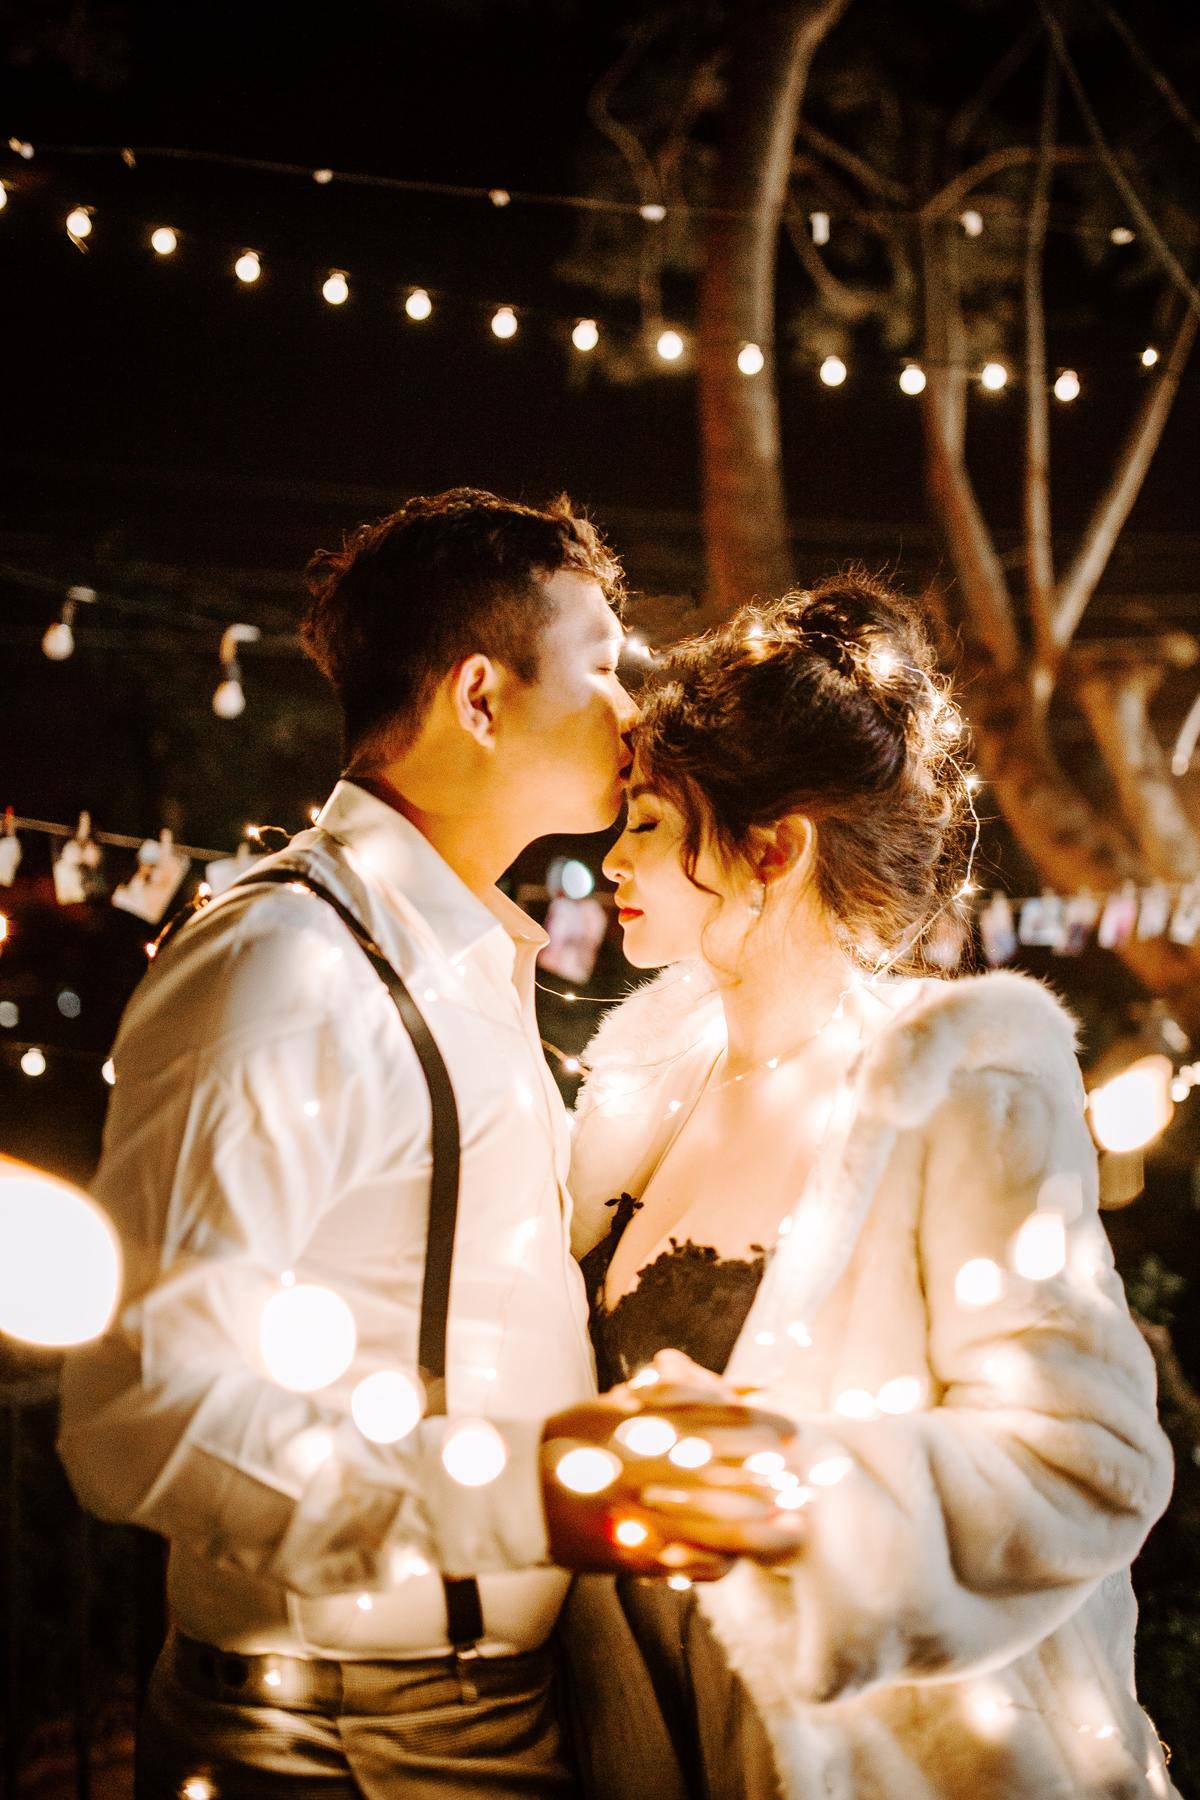 man kisses woman on the forehead while slow dancing with fairy lights